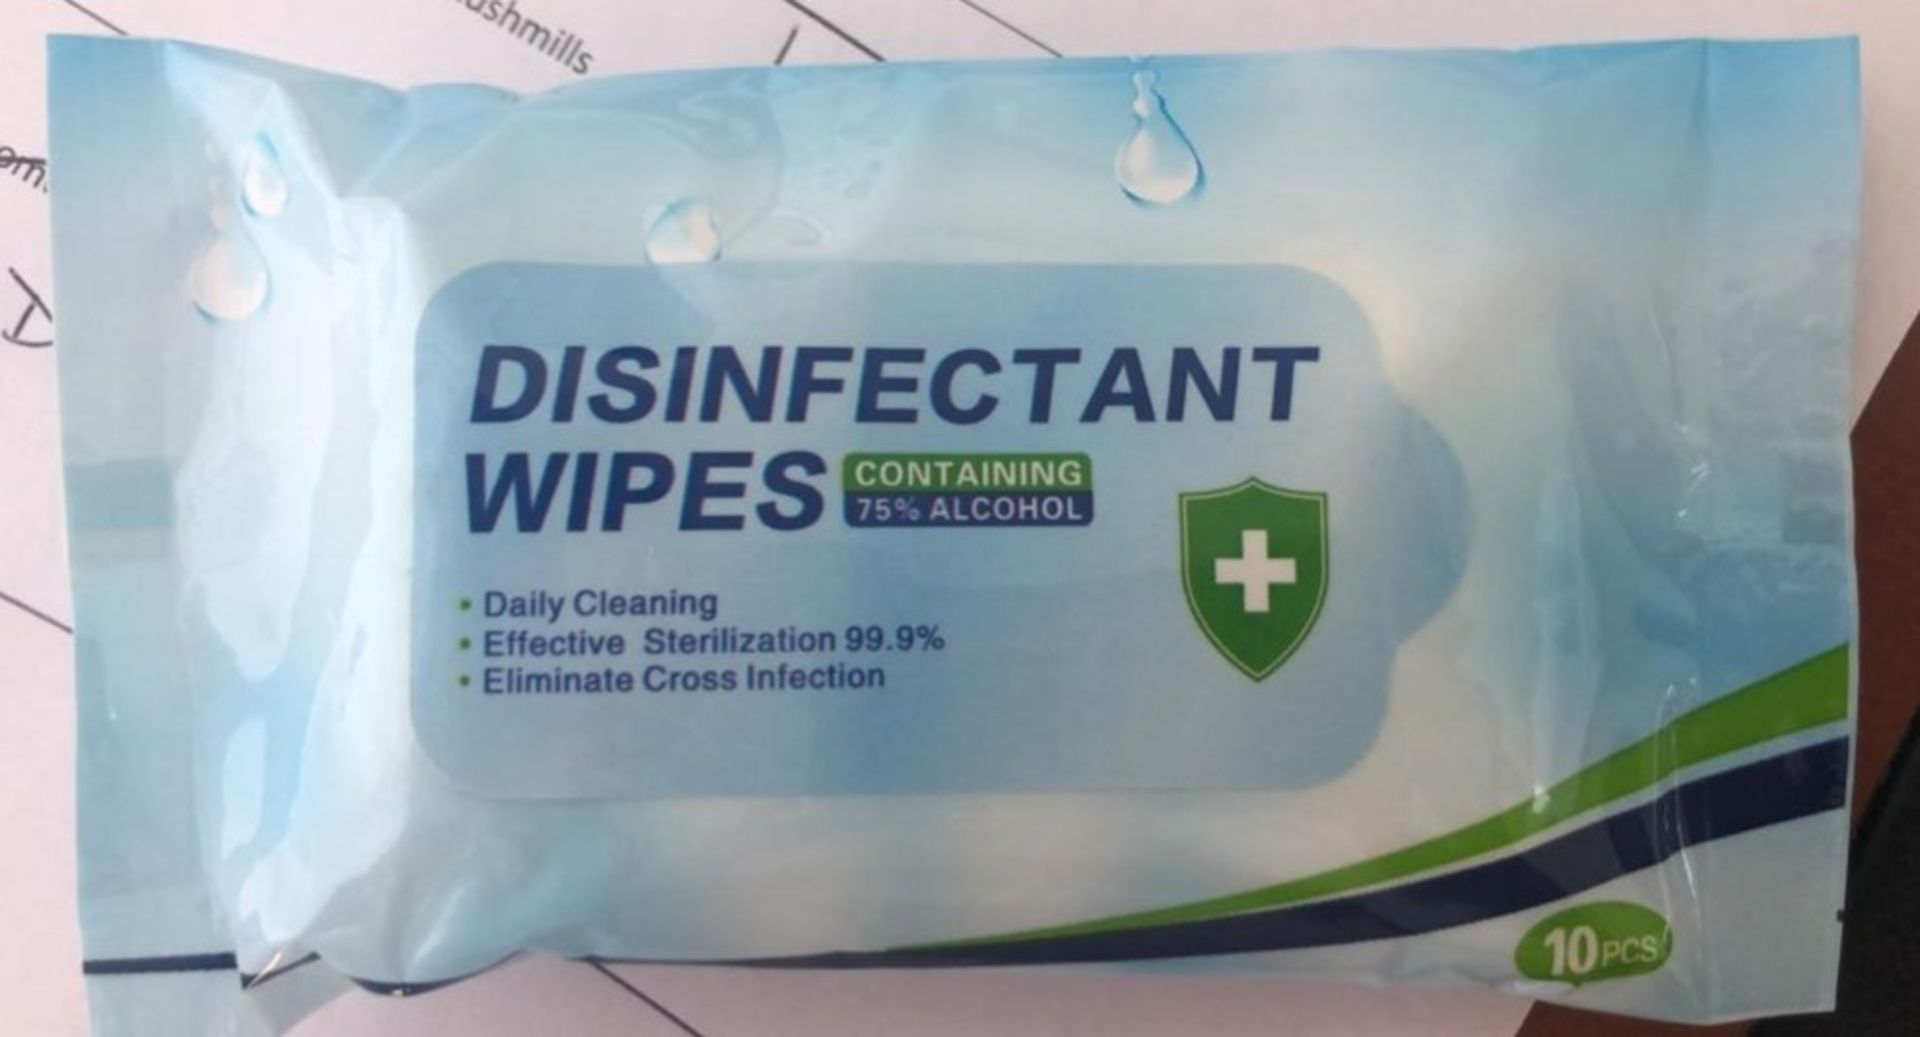 50,000 Antibacterial Disinfectant Wipes (75% Alcohol)